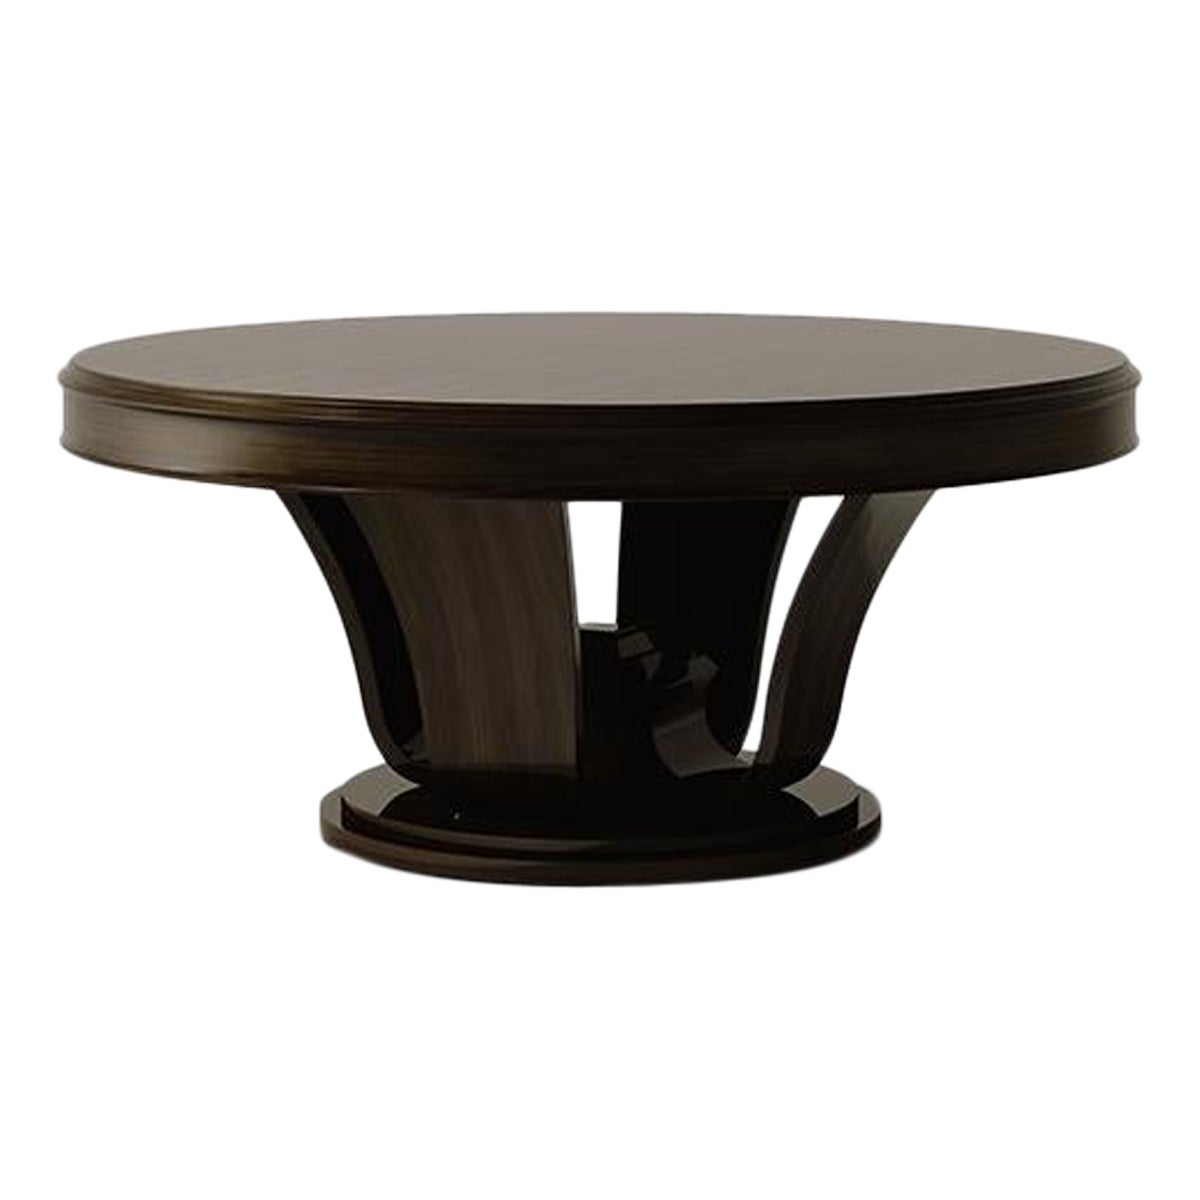 21st Century Carpanese Home Italia Table with Wooden Base Neoclassic, 6606